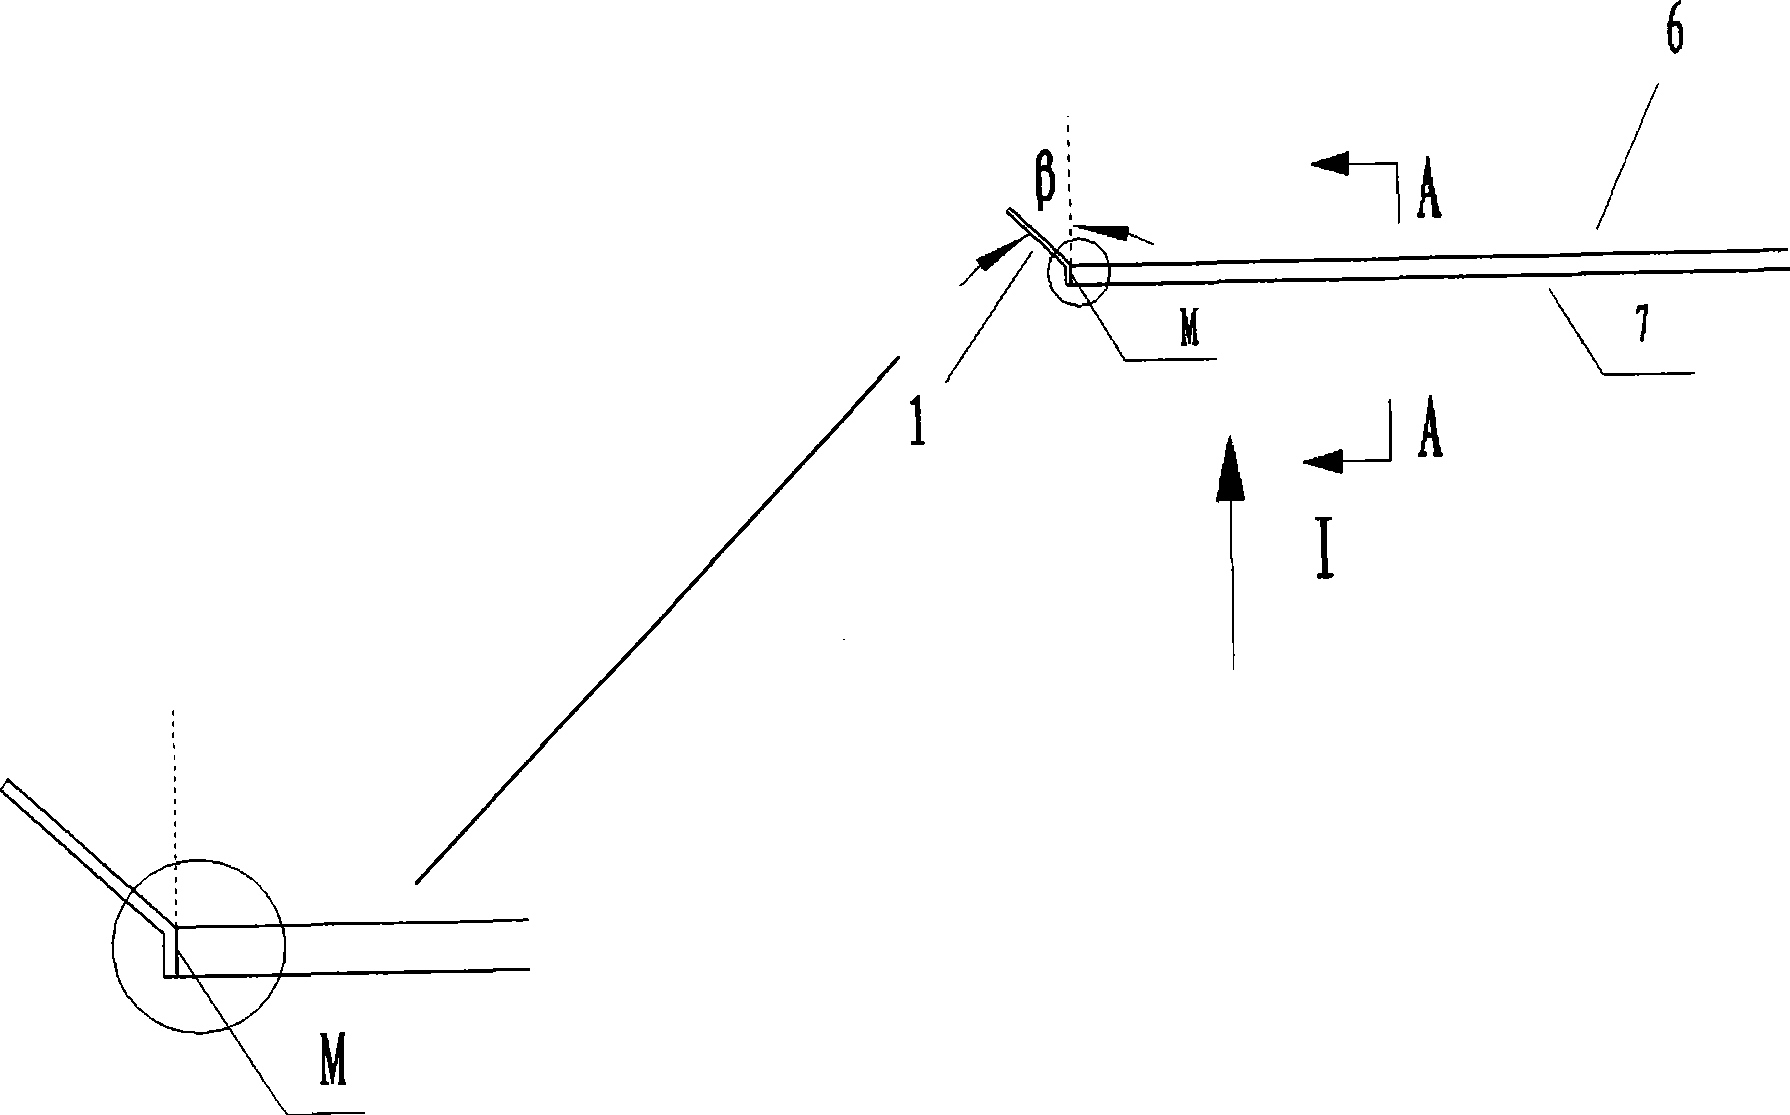 Horizontal axle wind mill with blade tip winglet